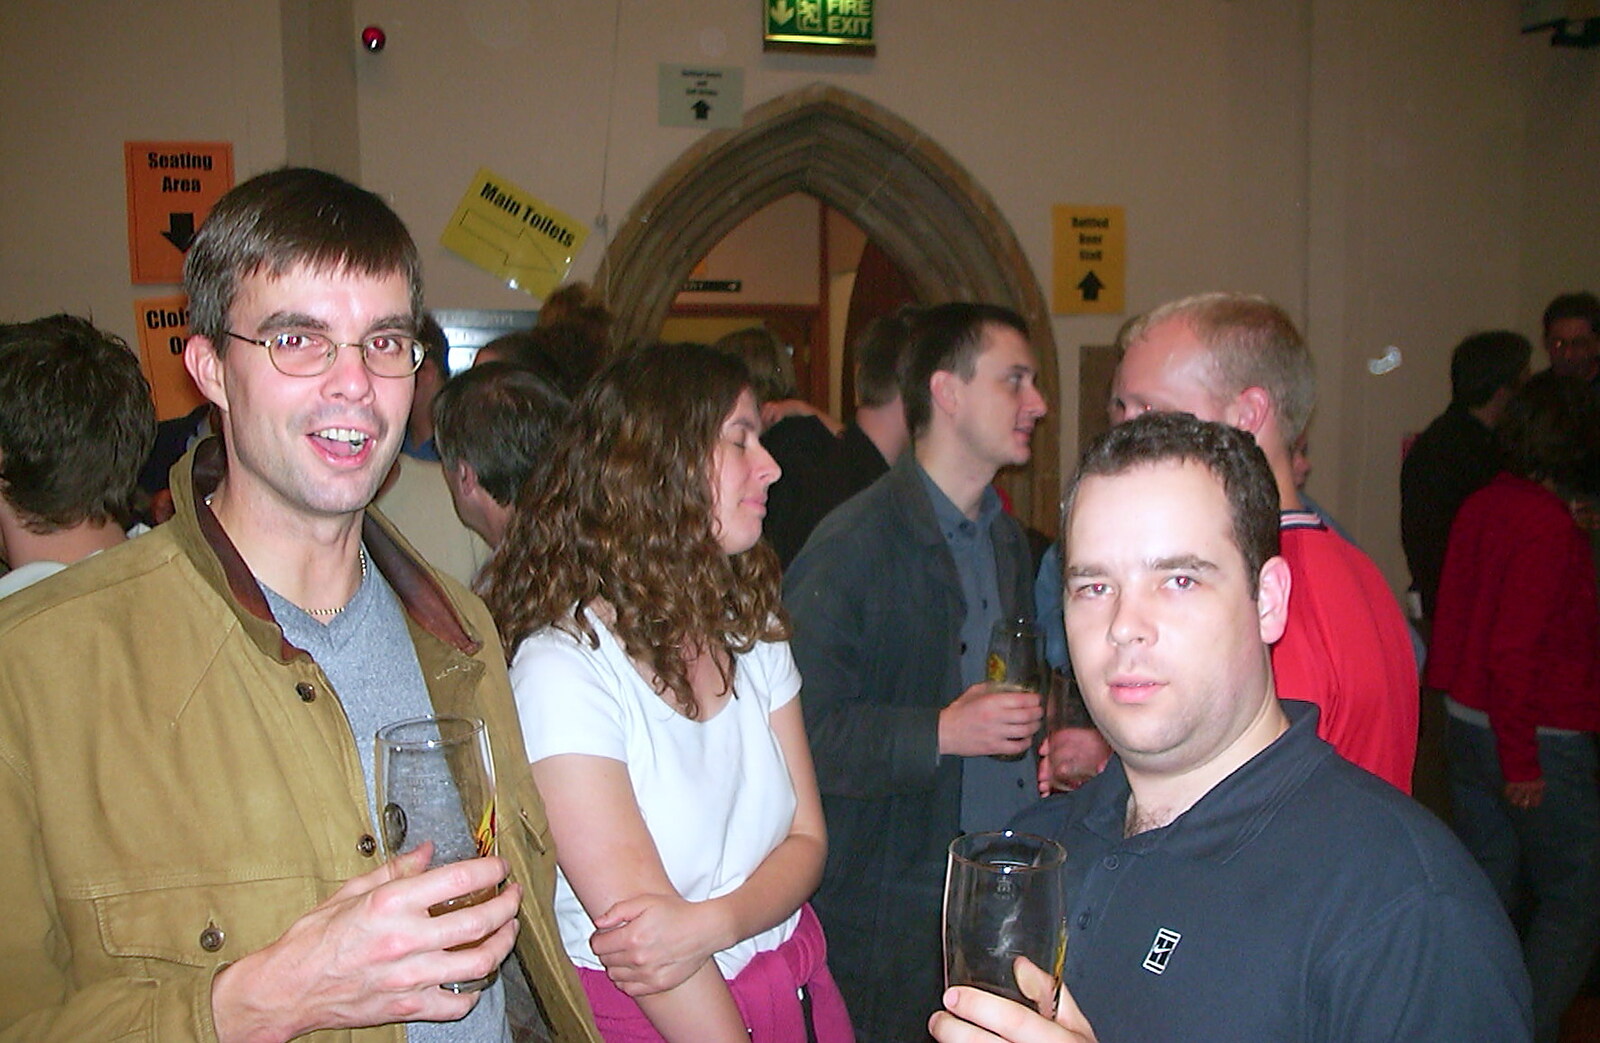 'Parrot' Polly and Russell from The Norwich Beer Festival, St. Andrew's Hall, Norwich - 26th October 2002